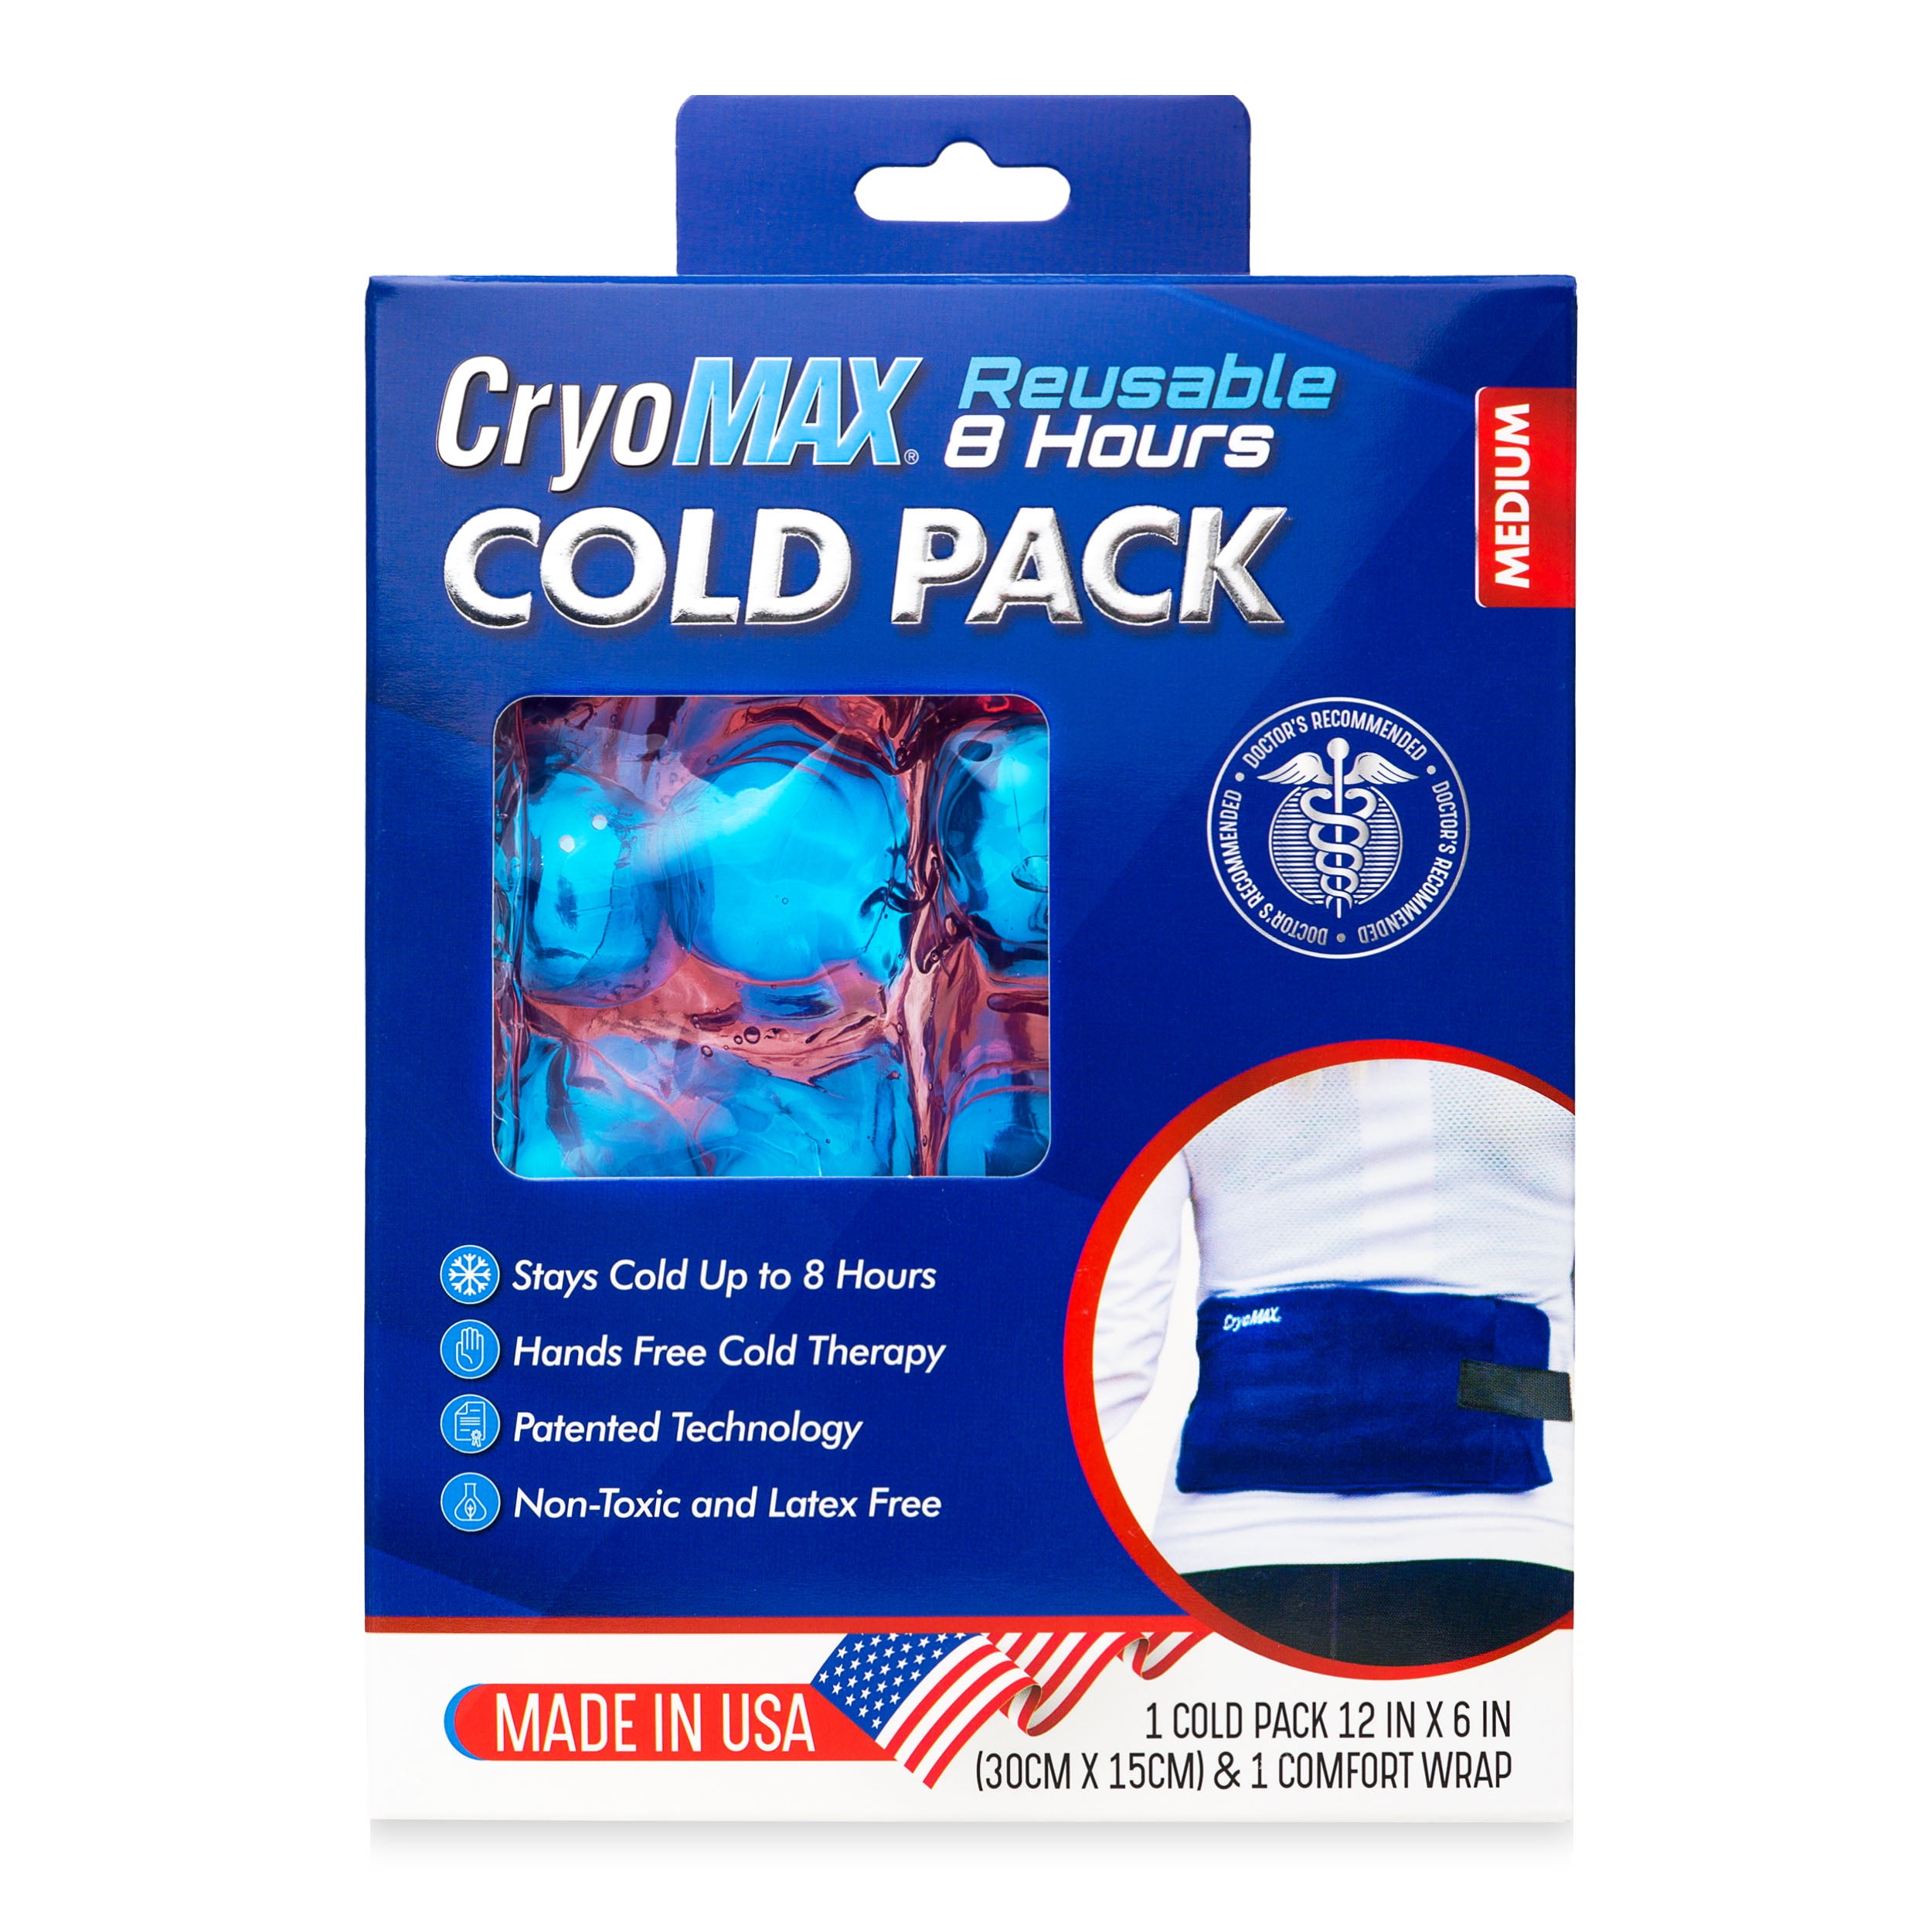 CryoMax Reusable 8 Hour Medium Cold Pack 